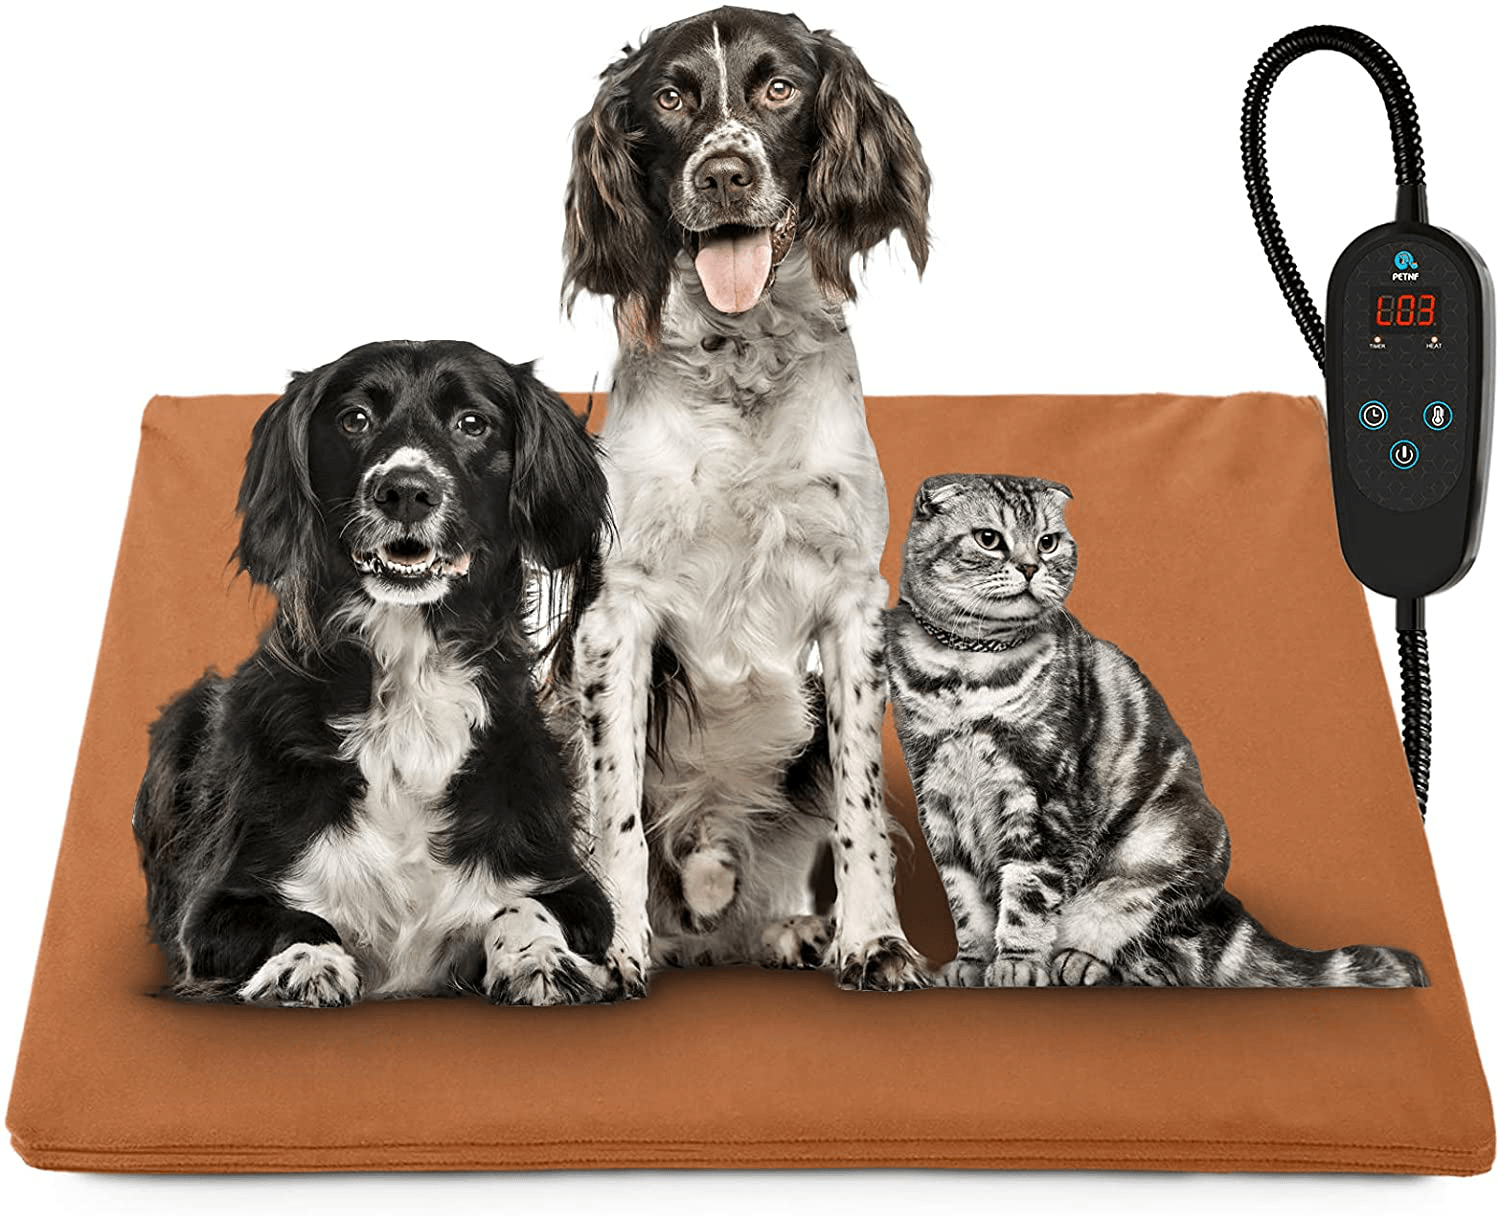 2021 Newest Pet Heating Pad Temperature Adjustment Dog Heating Pad Anti-Bite Puppy Heating Pad with Timer Cat Heating Pad Indoor Waterproof Pet Warming Pad Electric Heated Bed Mat for Small/Medium/Large Dog